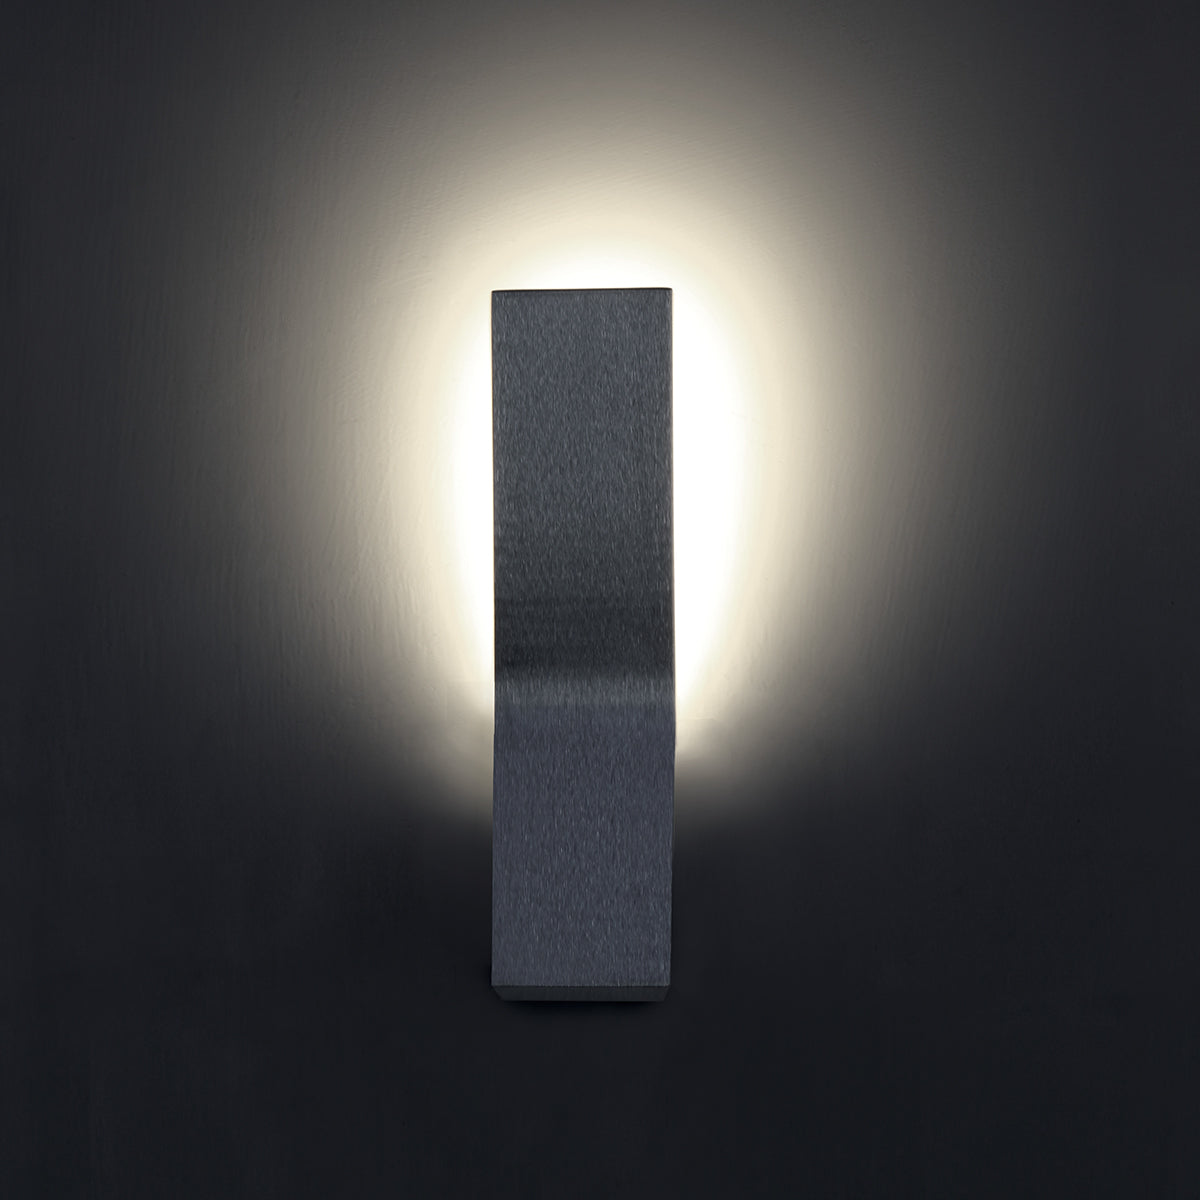 Blade 11" LED Wall Sconce